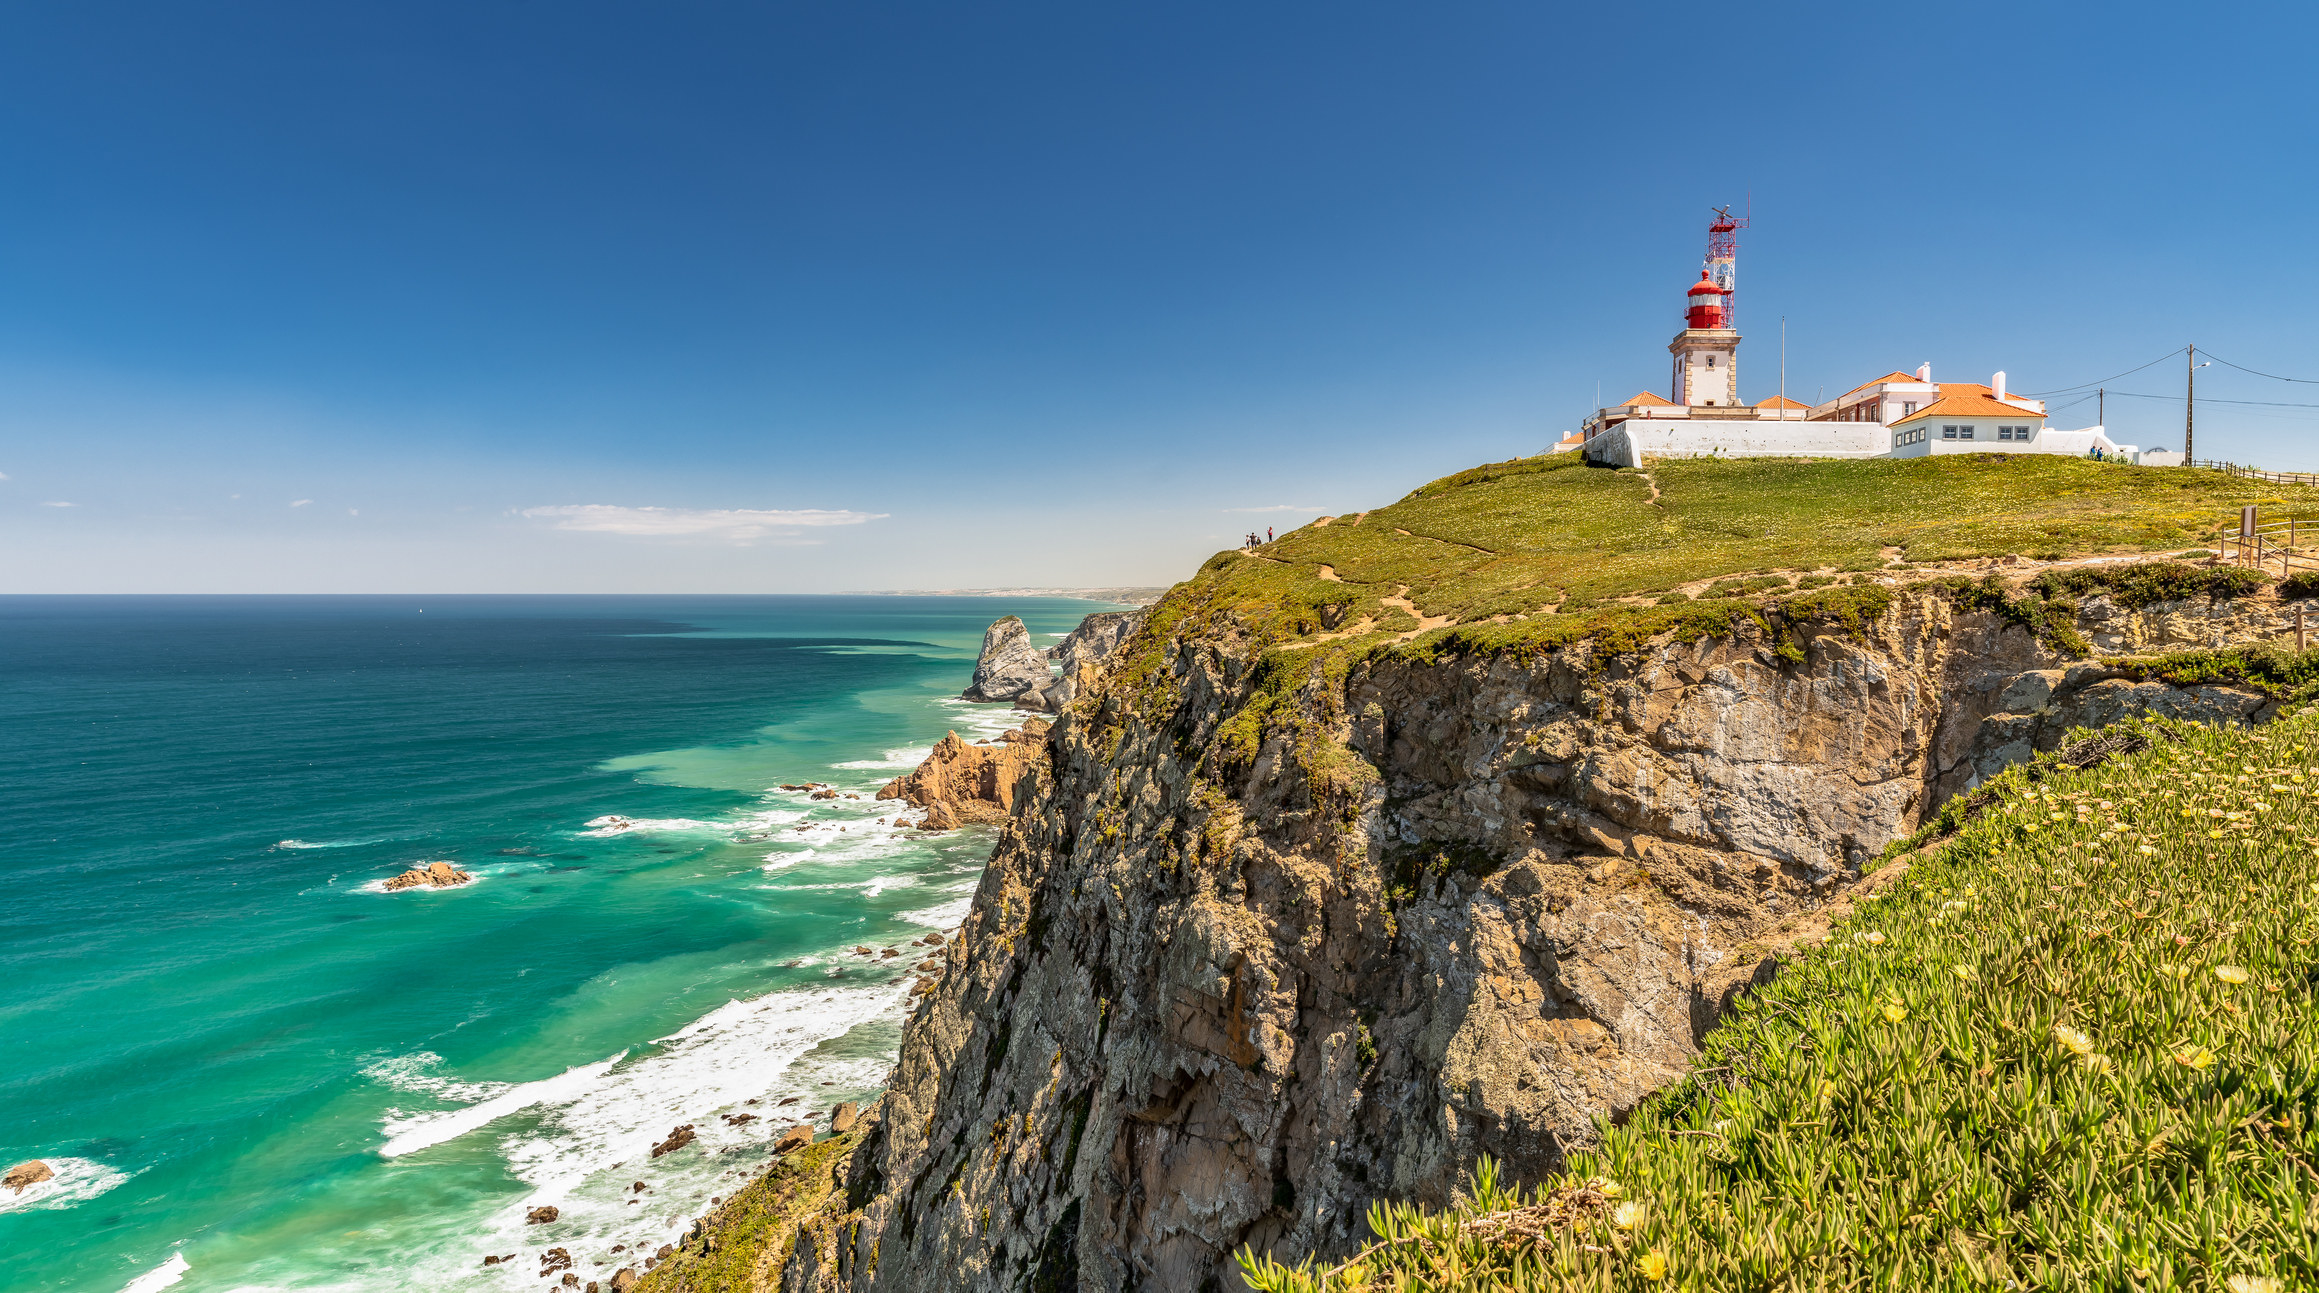 A lighthouse in Cabo de Roca, Portugal.